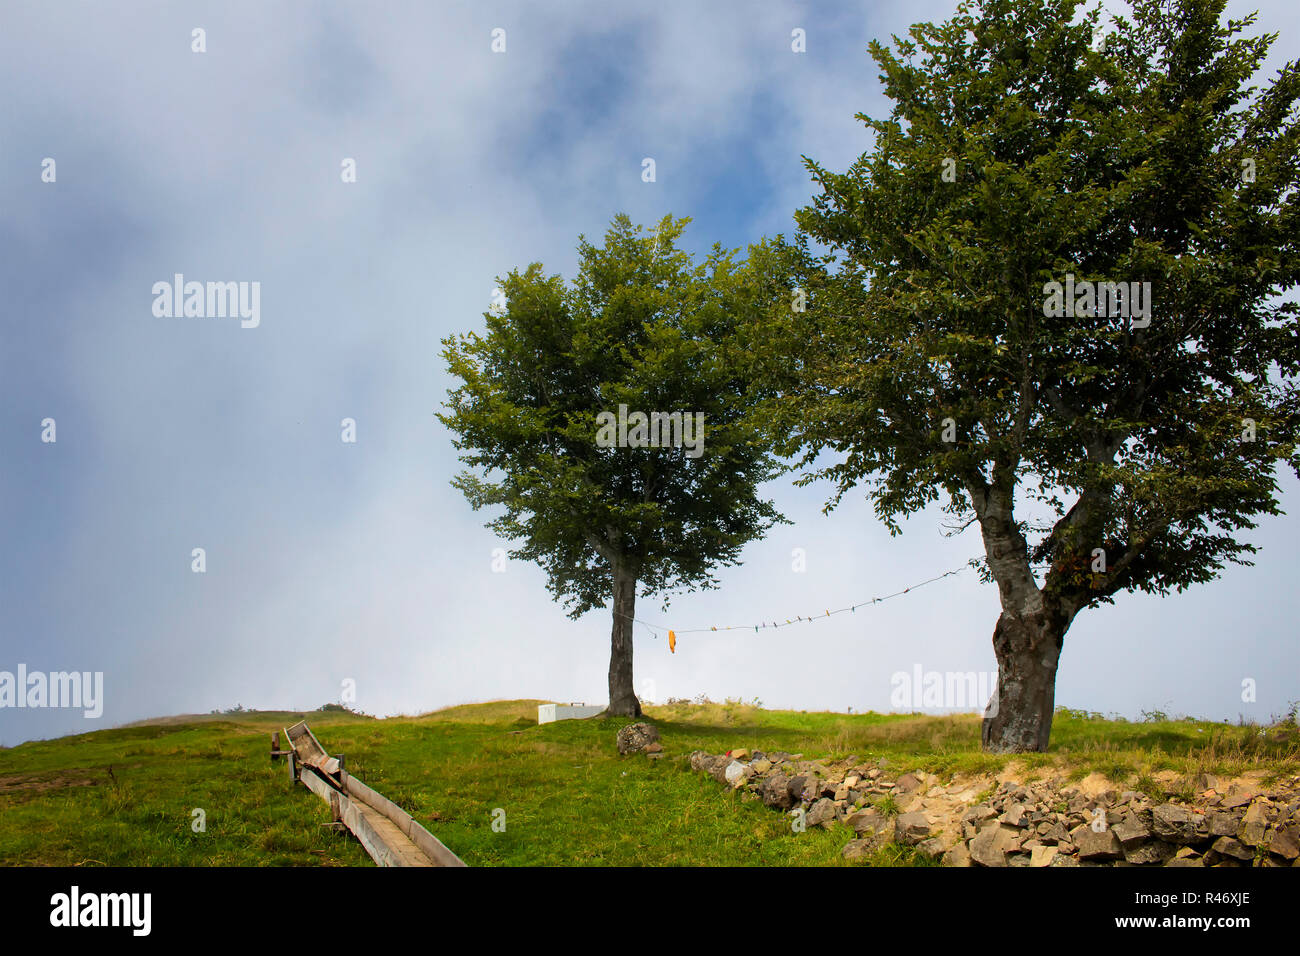 View of two trees at the top of a mountain with fog background creating beautiful nature scene. The image is captured in Trabzon/Rize area of Black Se Stock Photo